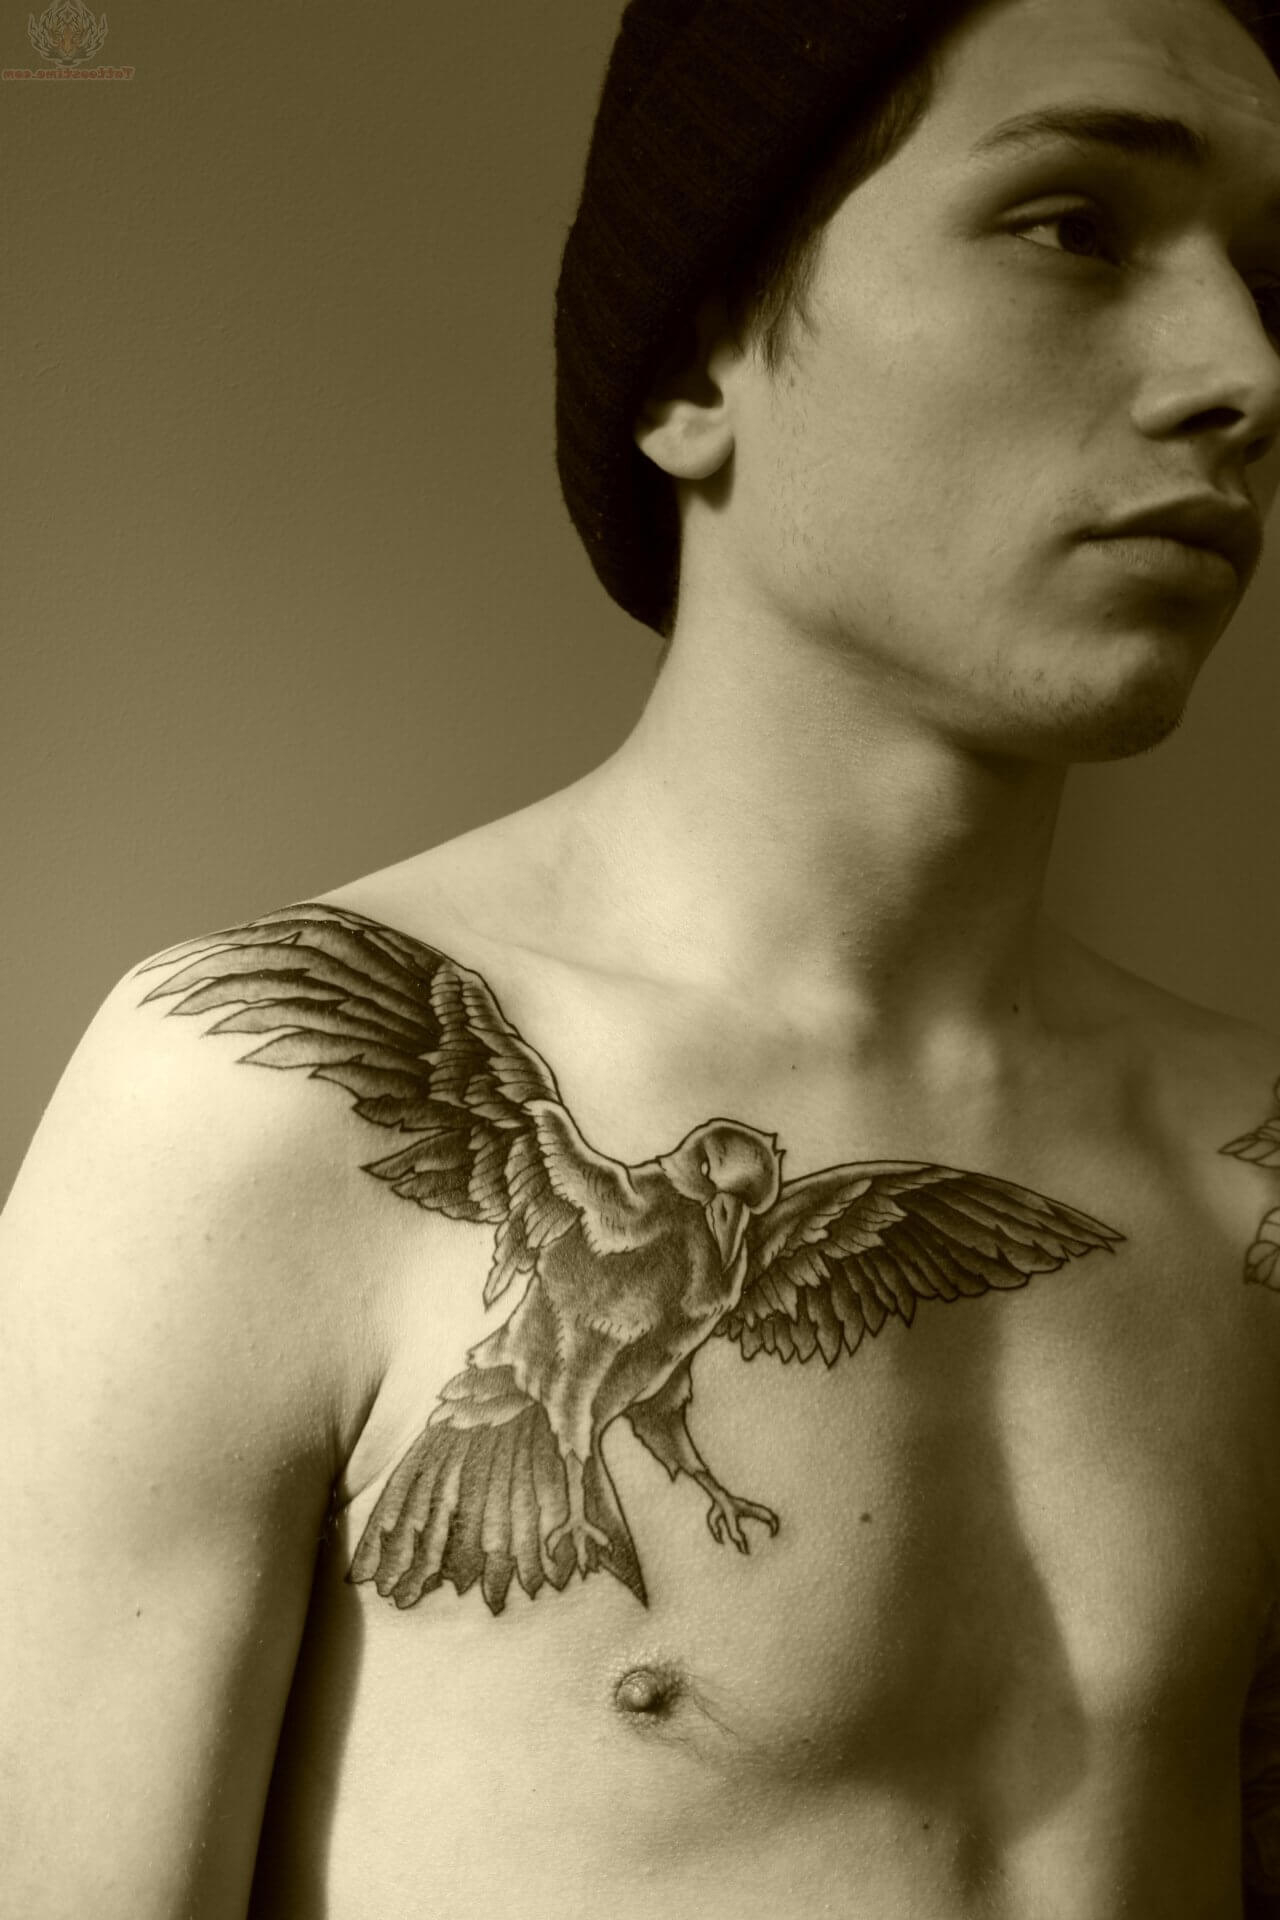 The 100 Best Chest Tattoos For Men Improb inside sizing 1280 X 1920